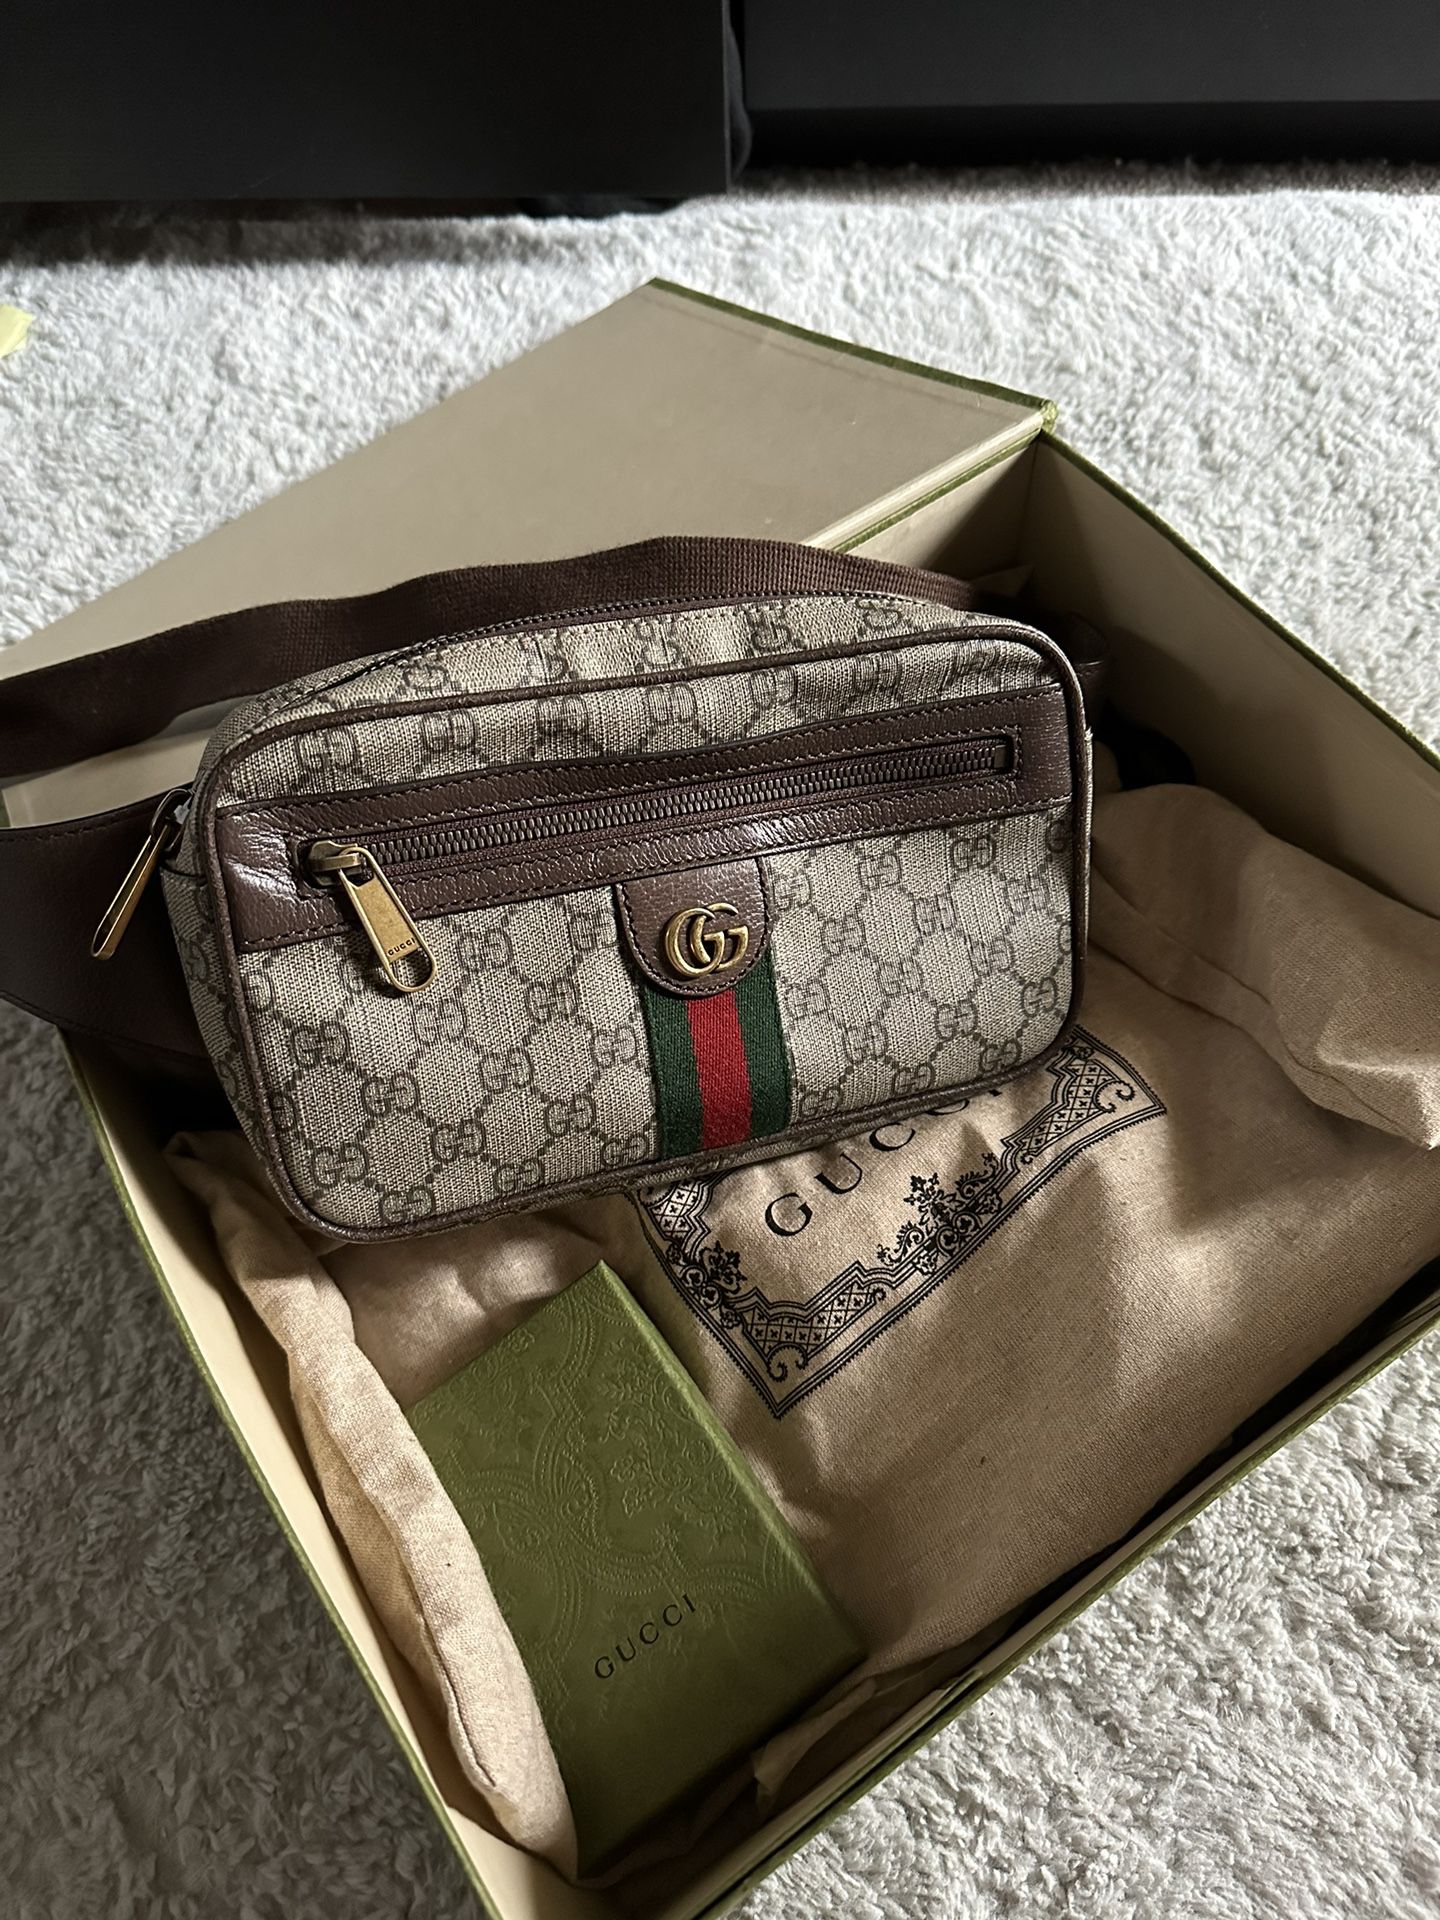 Gucci & Louis Vuitton for Sale in San Diego, CA - OfferUp